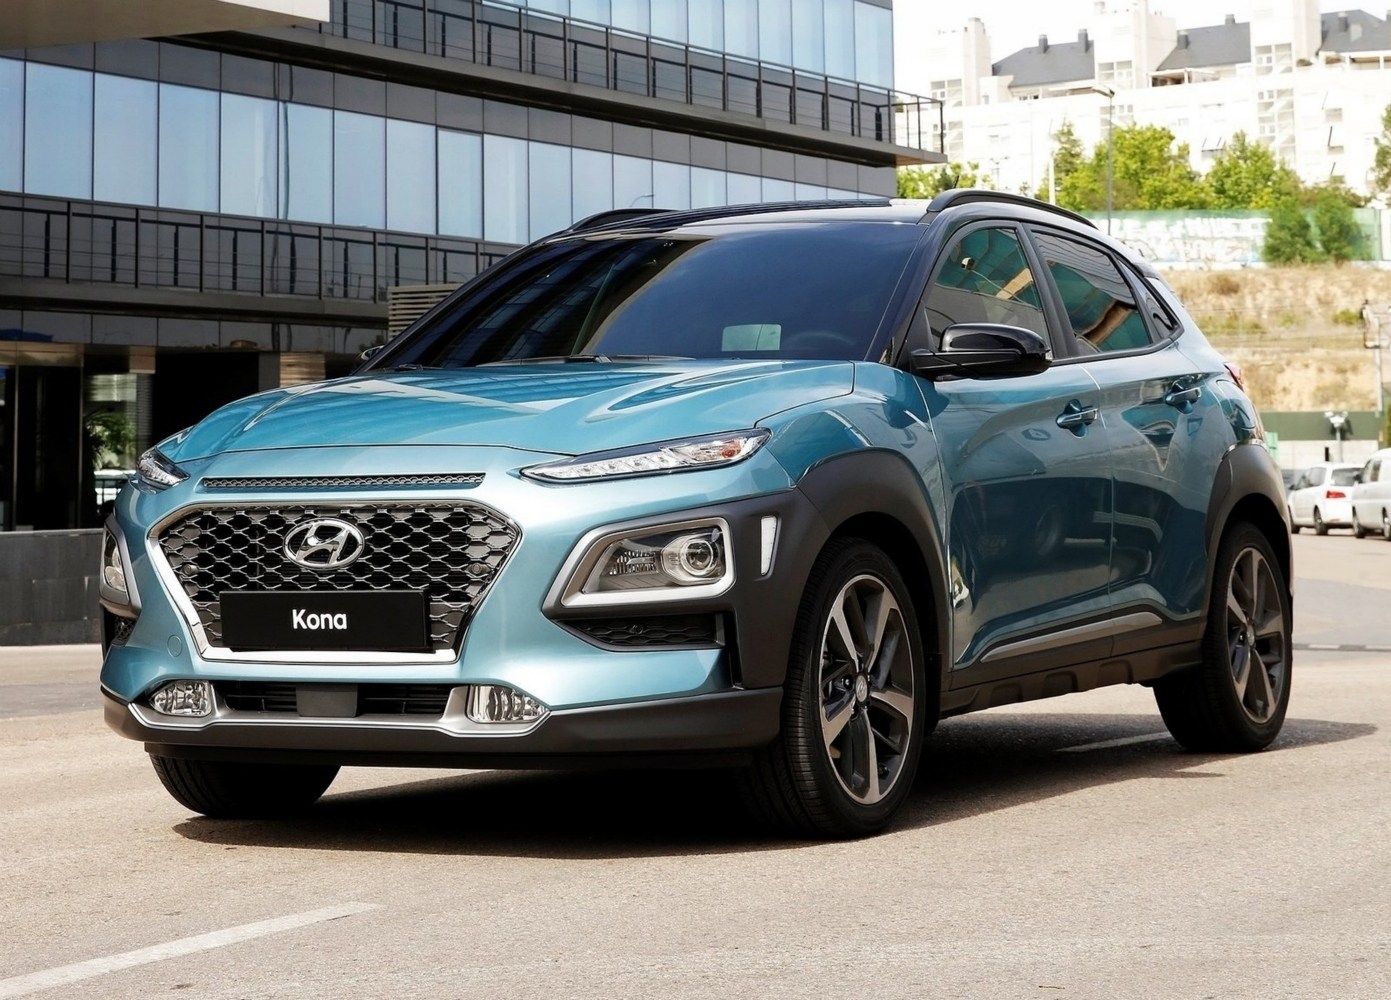 Hyundai Kona Sets An India Target Of Above 8 Units Annually   8une